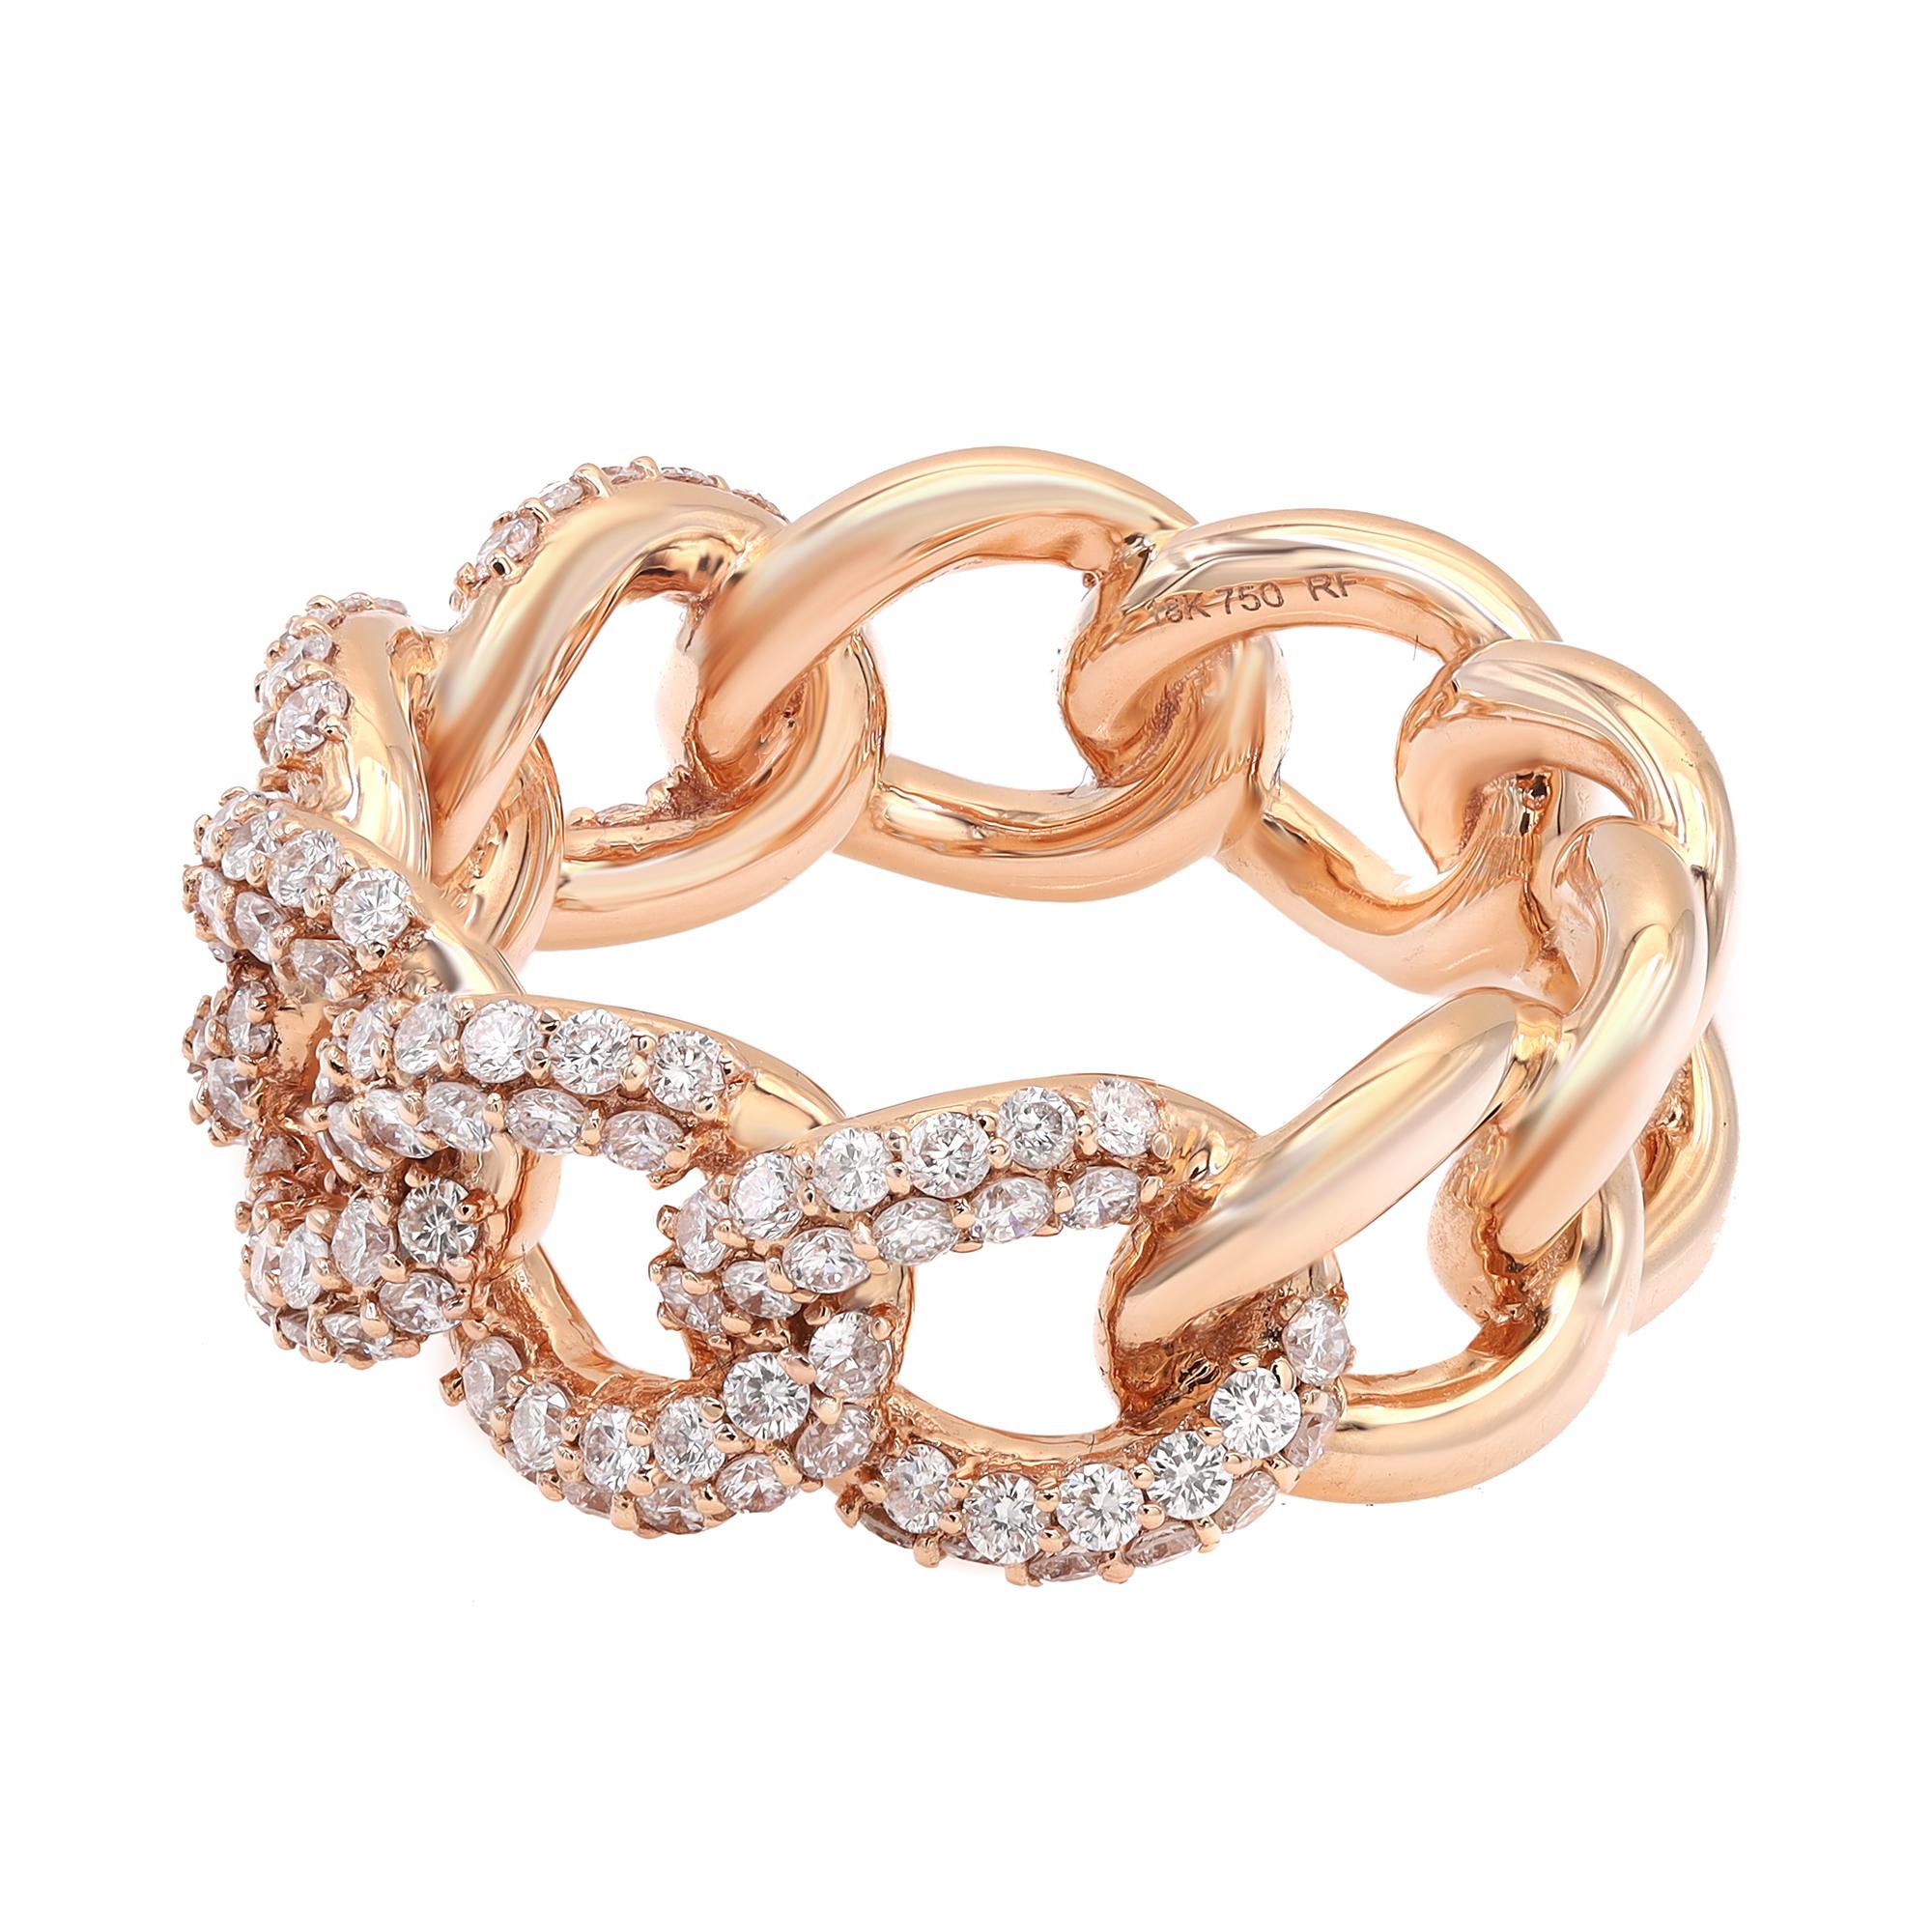 This classic yet elegant chain link ring band features pave set round brilliant cut diamonds encrusted halfway through the ring. Crafted in high polished 18k rose gold. Total diamond weight: 1.00Cttw. Diamond quality: Color G-H and Clarity VS-SI.